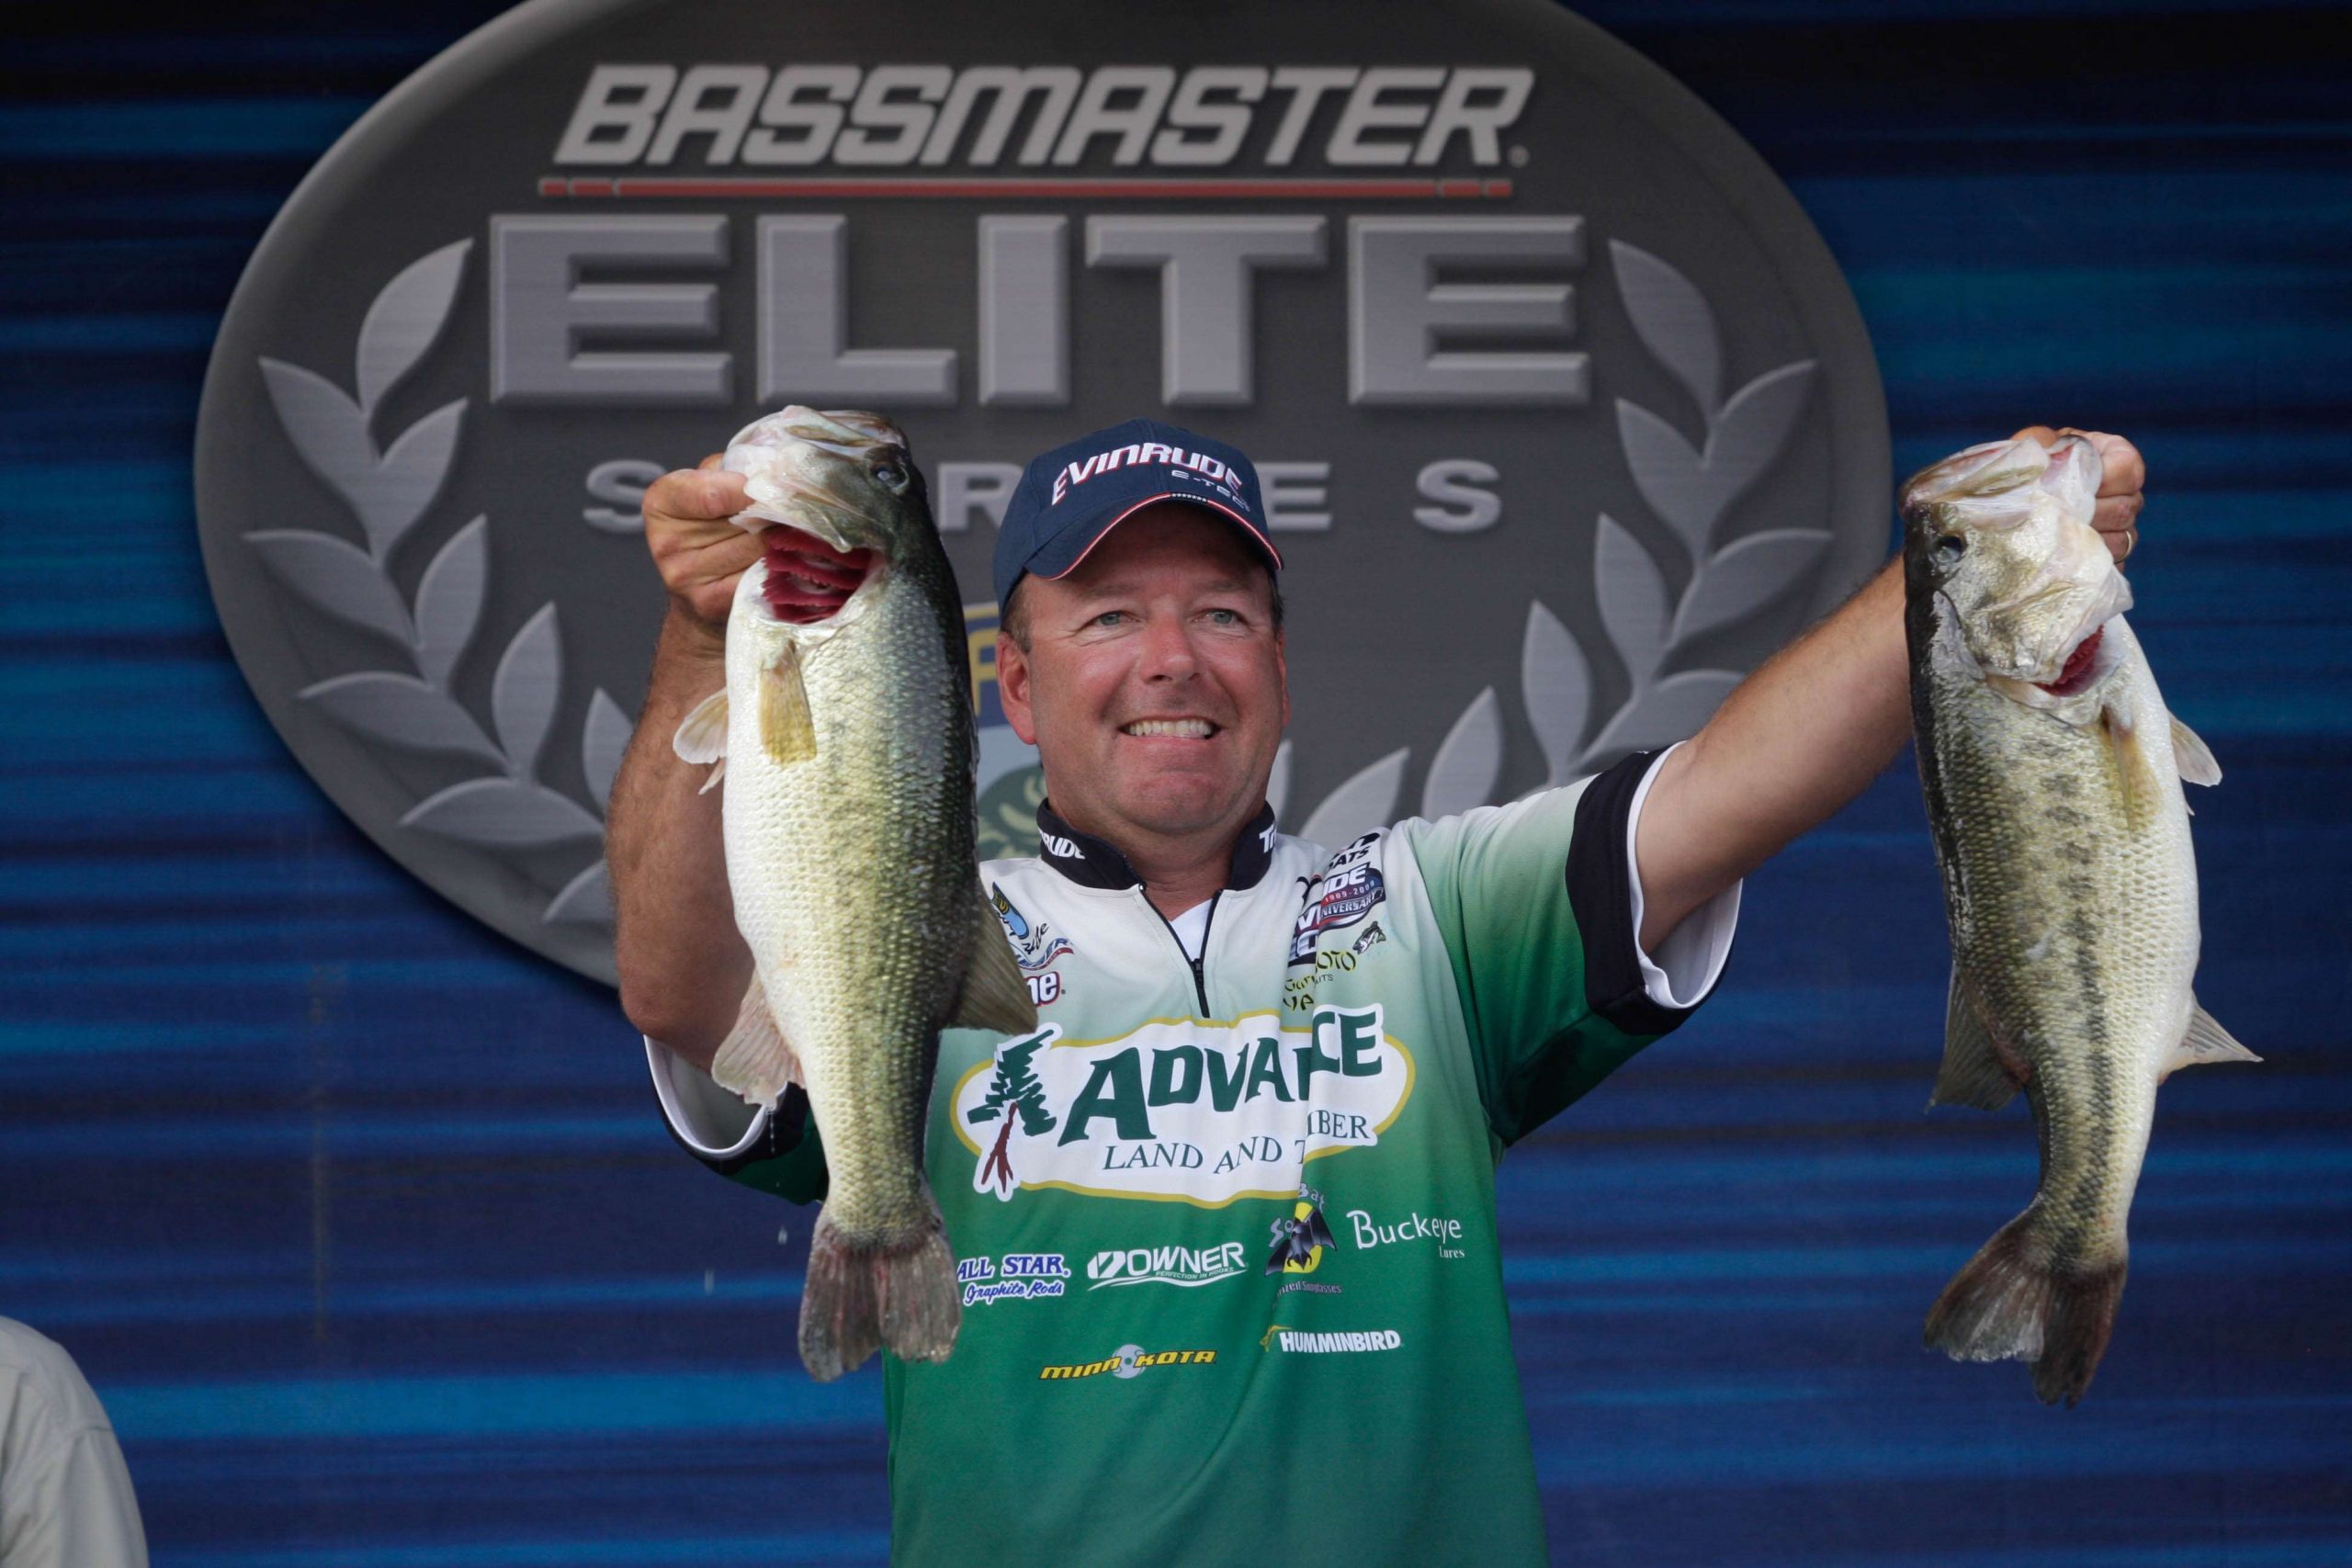 Davy Hite finished in 23rd place with 67-14, but he came back the next year and got a runner-up in the May 2010 event on Guntersville.